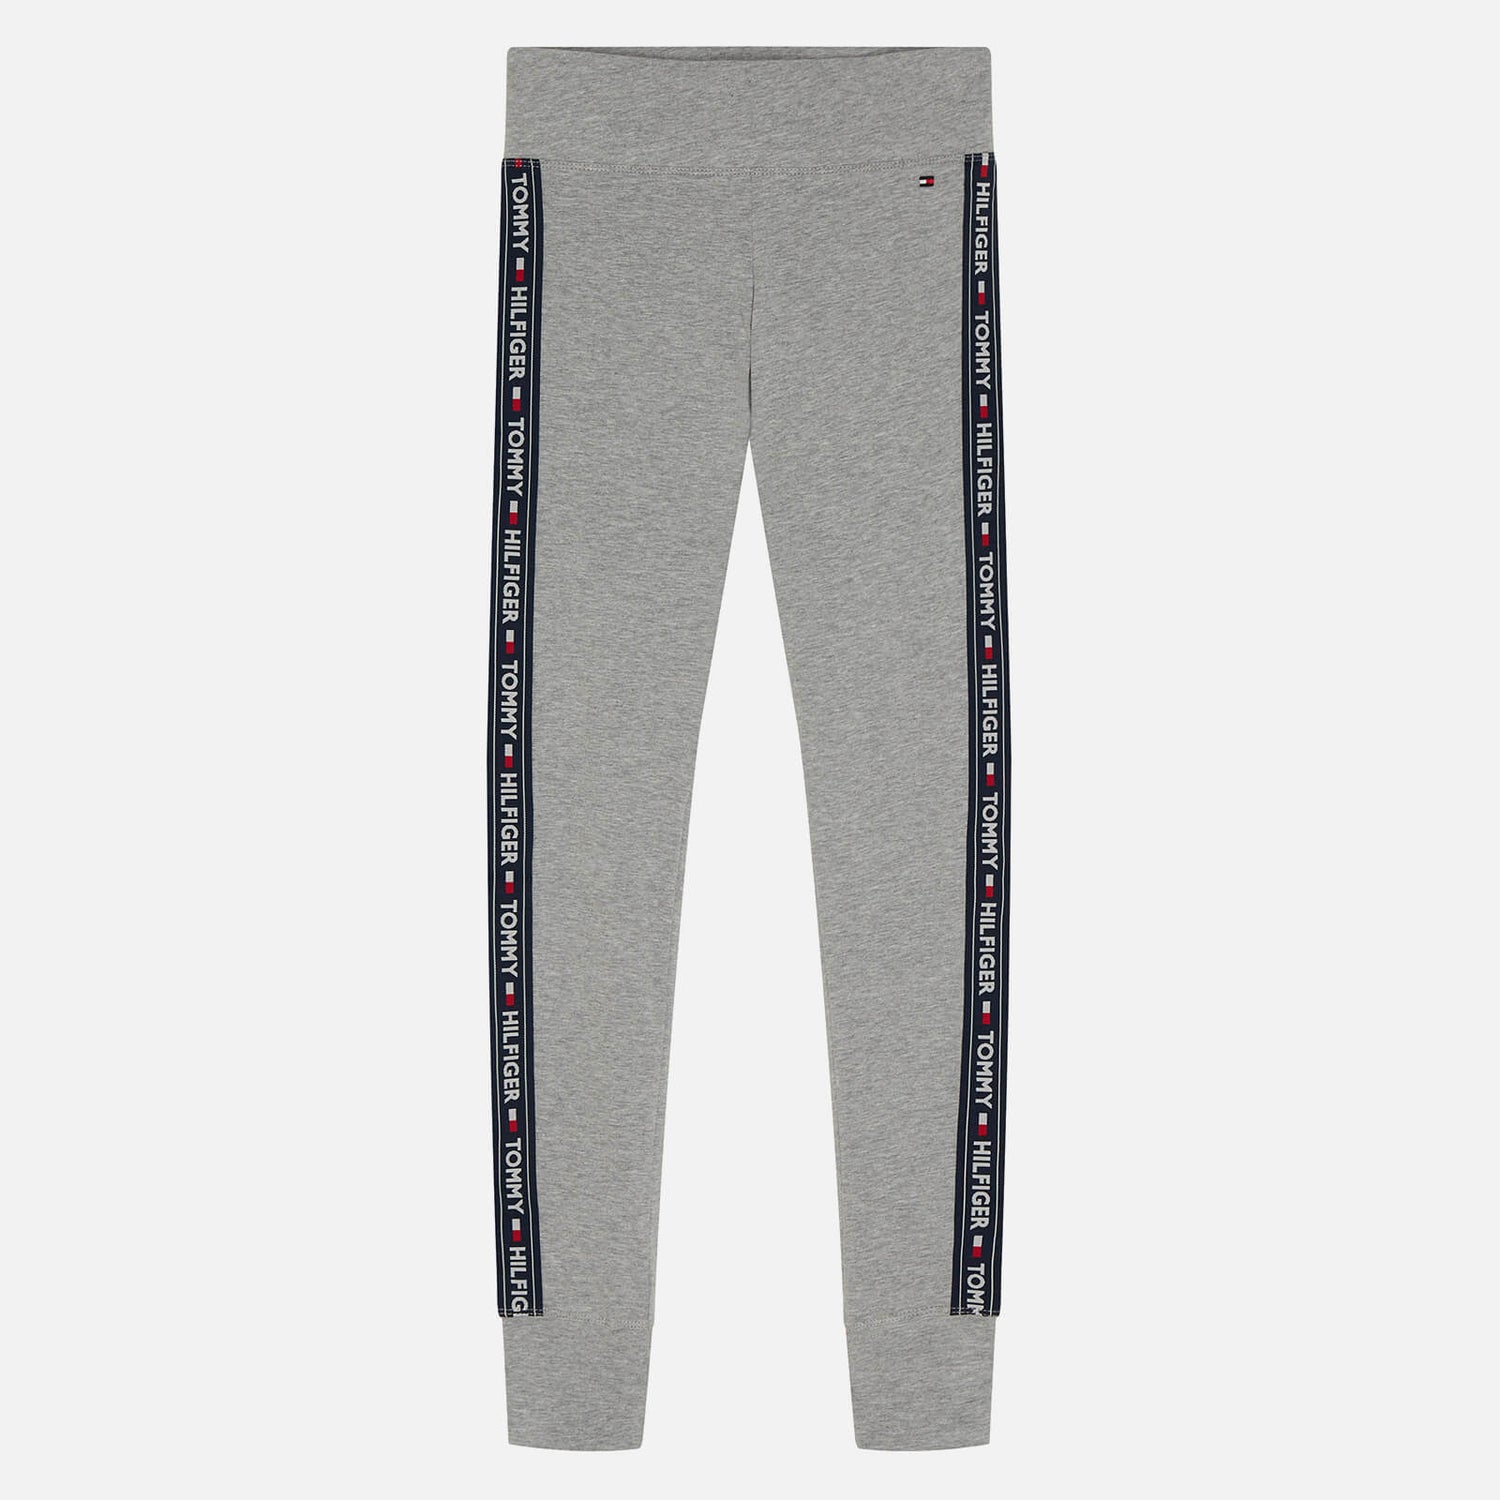 Tommy Hilfiger Women's Authentic Leggings - Grey Heather